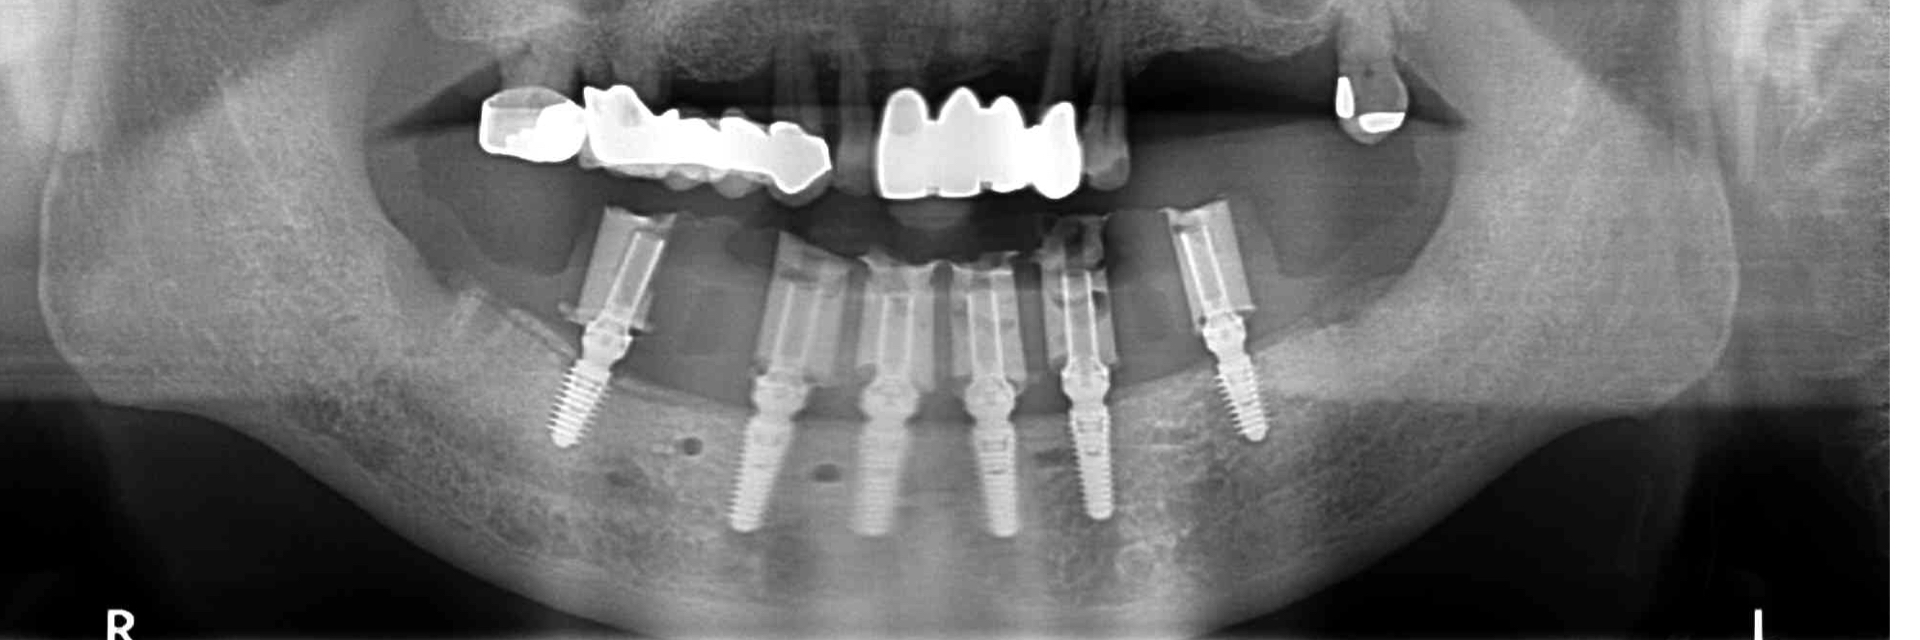 Digital-Workflow-for-Full-Arch-Implant-Supported-Teeth-Chrome-GuidedSmile-Kazemi-Oral-Surgery-Bethesda-Implant-Dentist.015